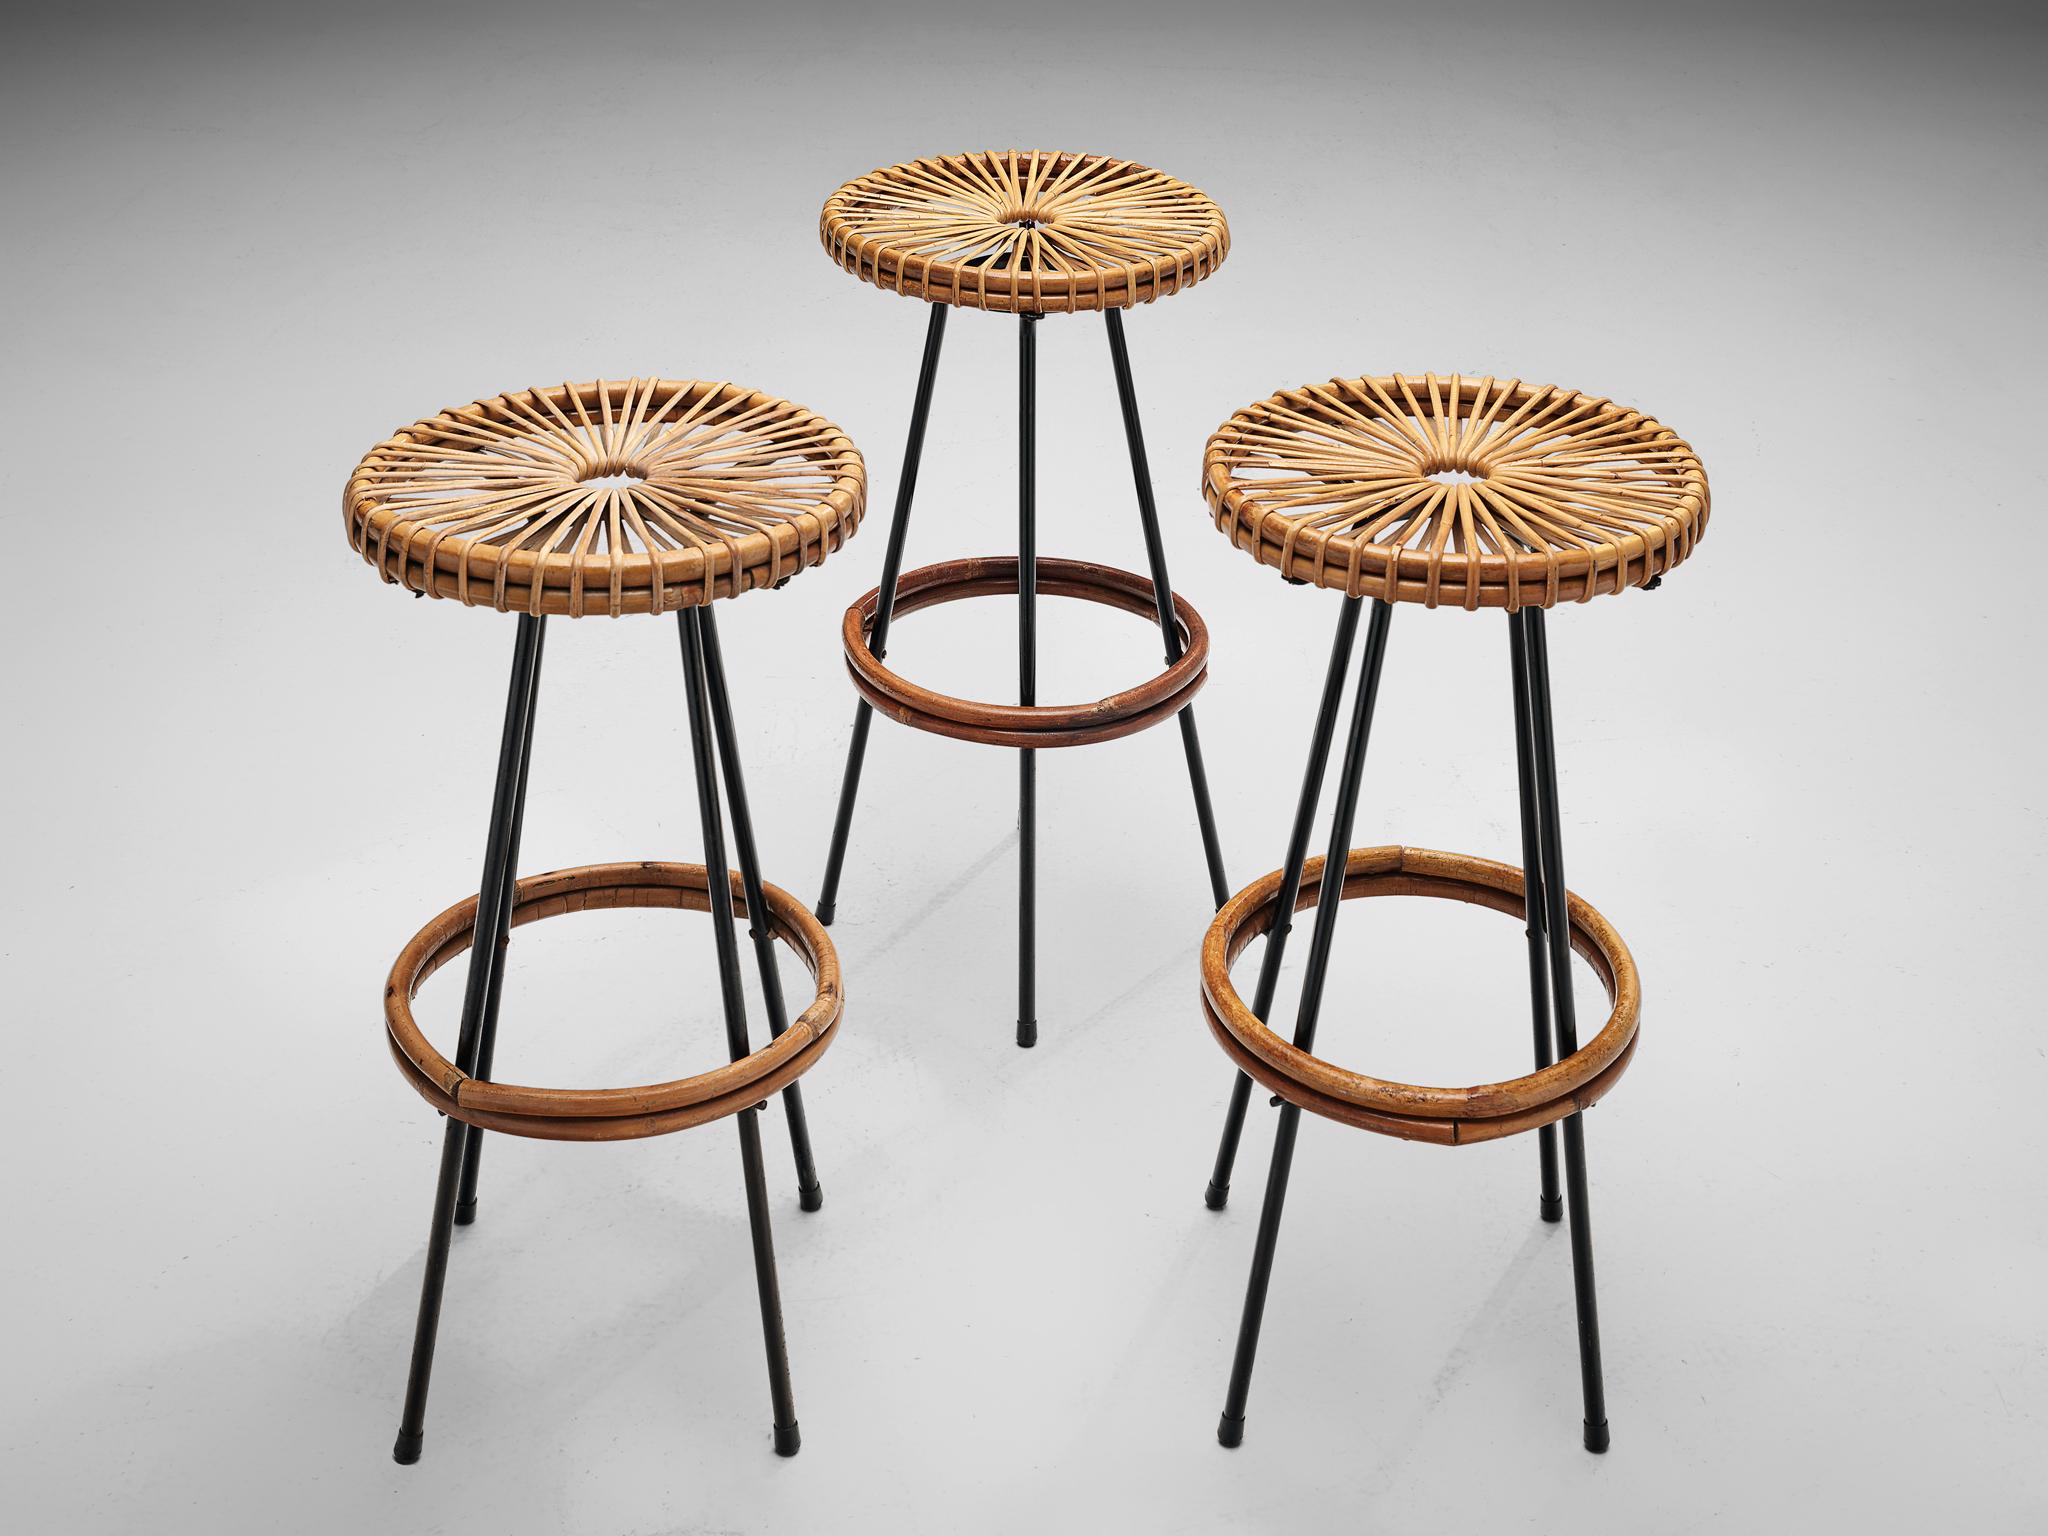 Dirk Van Sliedrecht for Rohe, Set of three barstools, wicker and metal, The Netherlands, 1950s

A set of three bar stools, designed by Dirk Van Sliedrecht for Rohe. The circular seat is made of woven wicker, which is supported by a slender, black